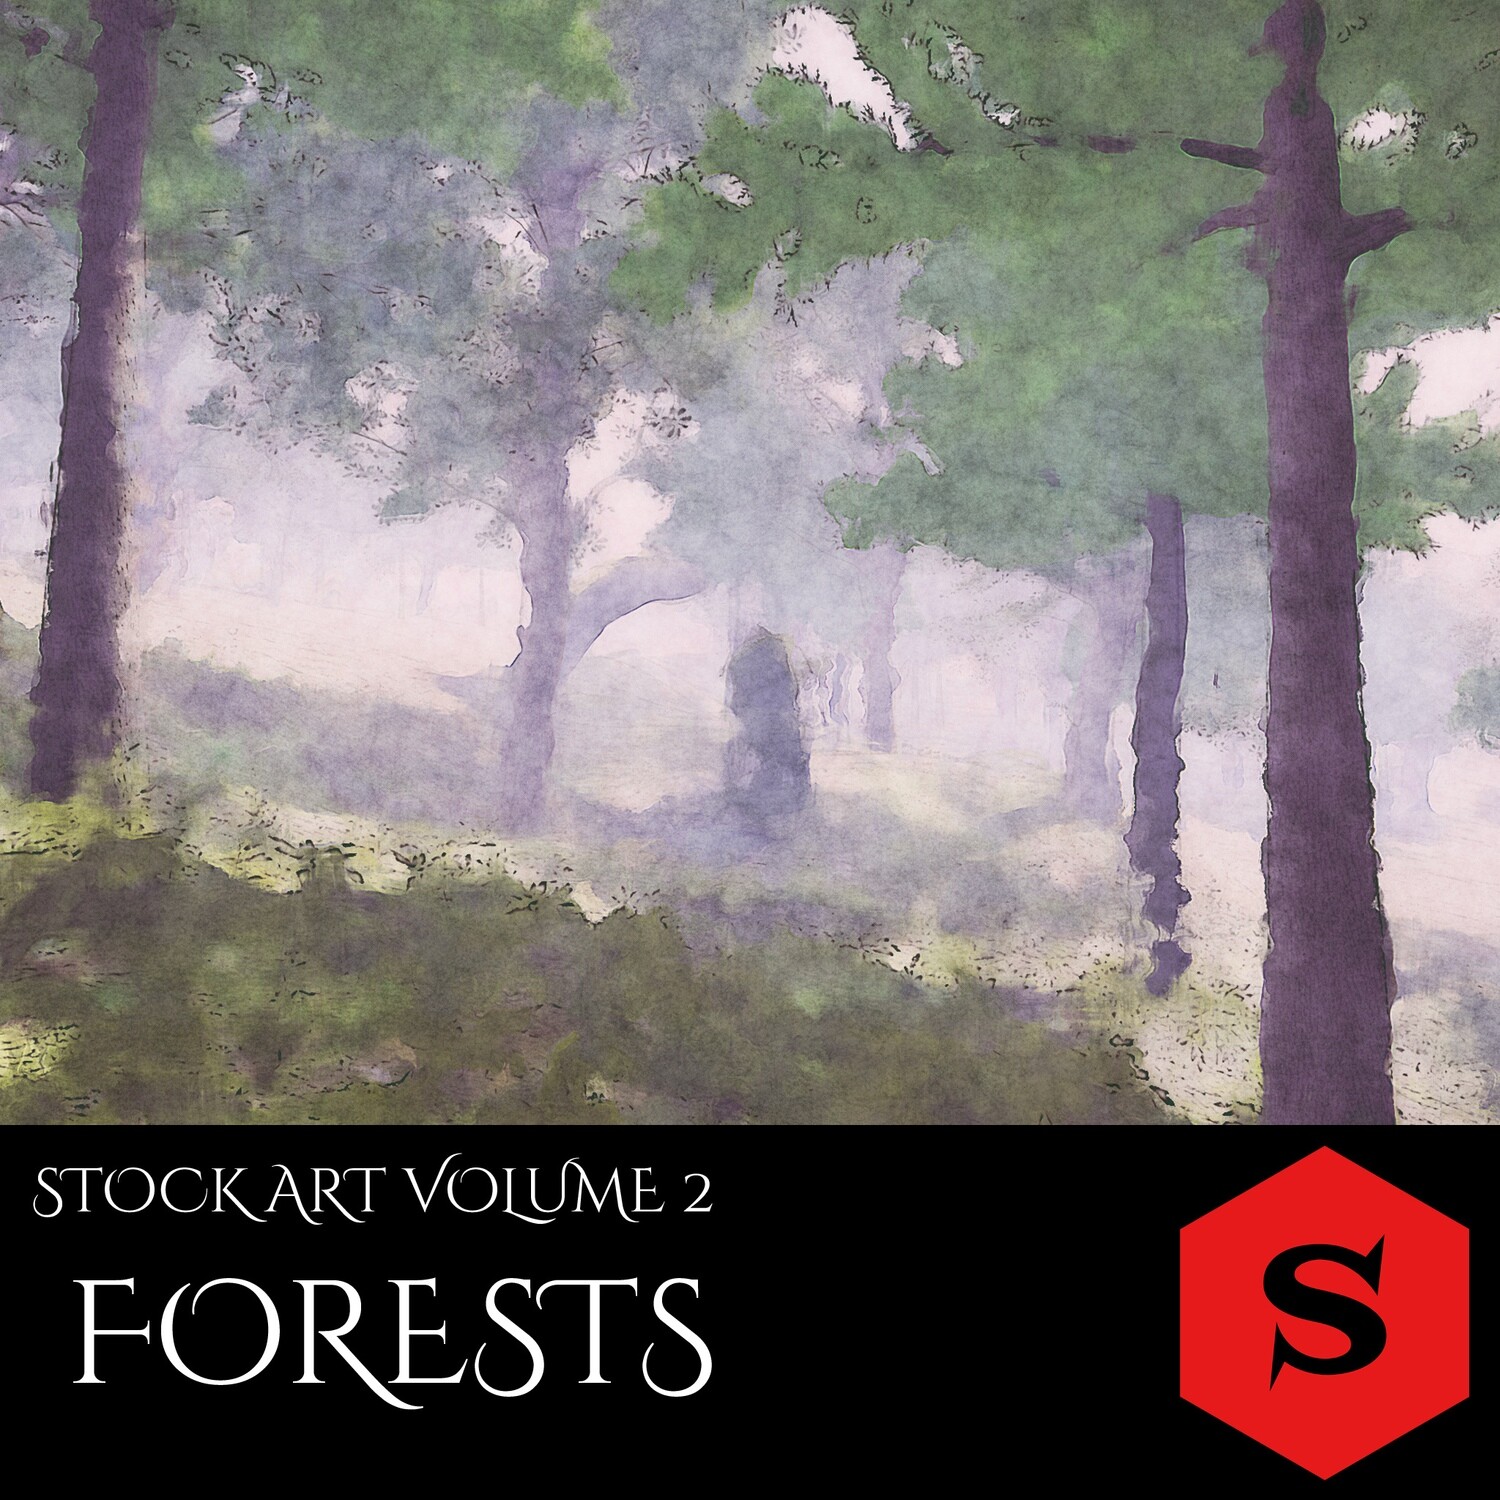 Stock Art Volume 2: Forests